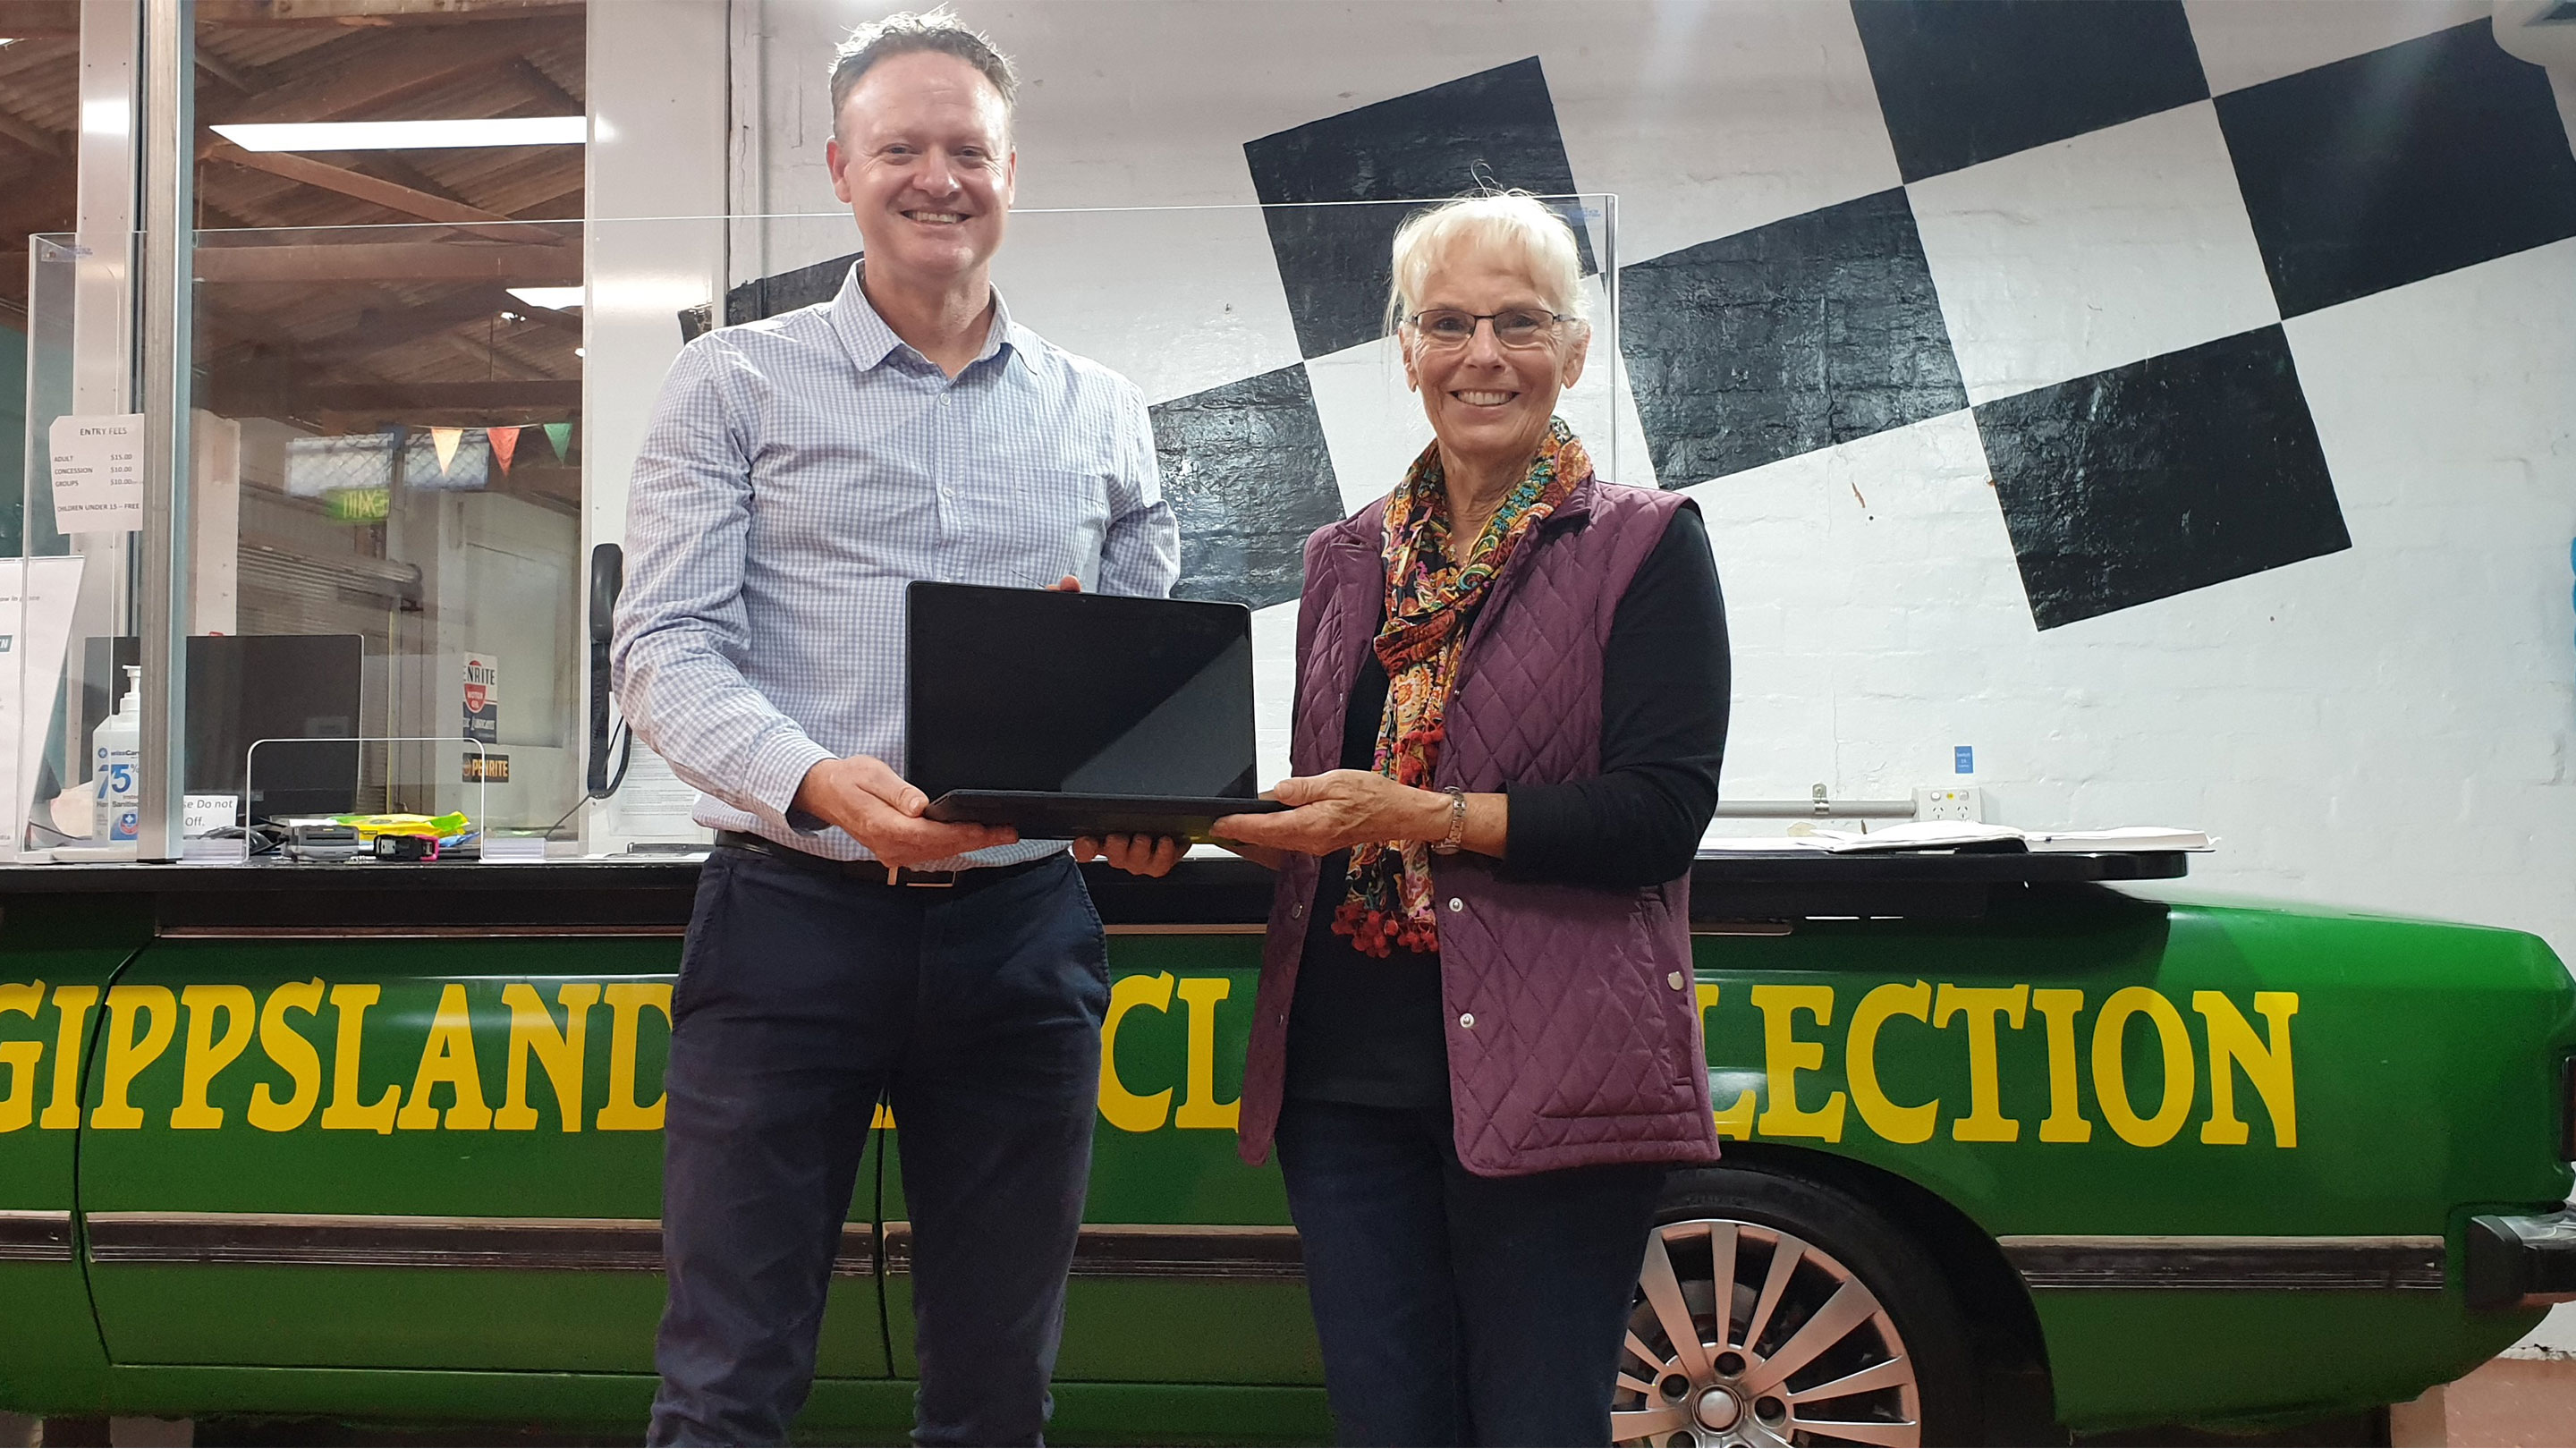 Gippsland Car Collection in Maffra was another recipient of an Esso laptop.